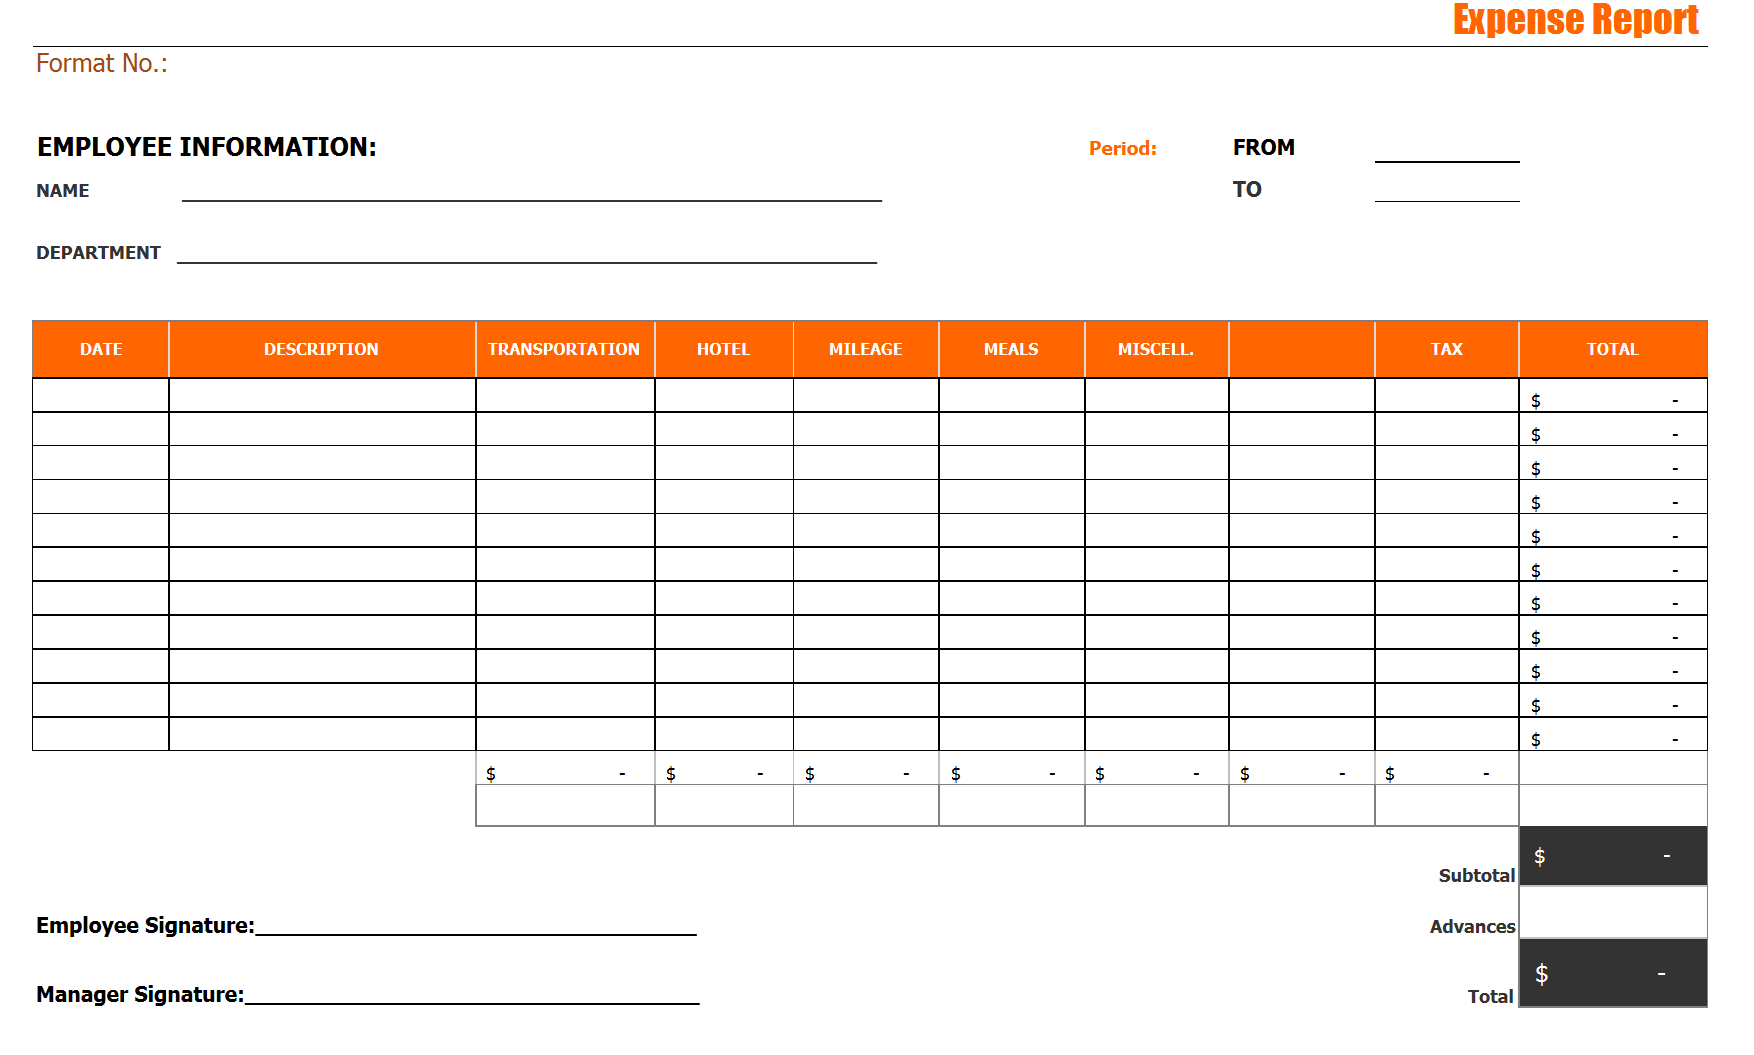 office-expense-report-template-db-excel